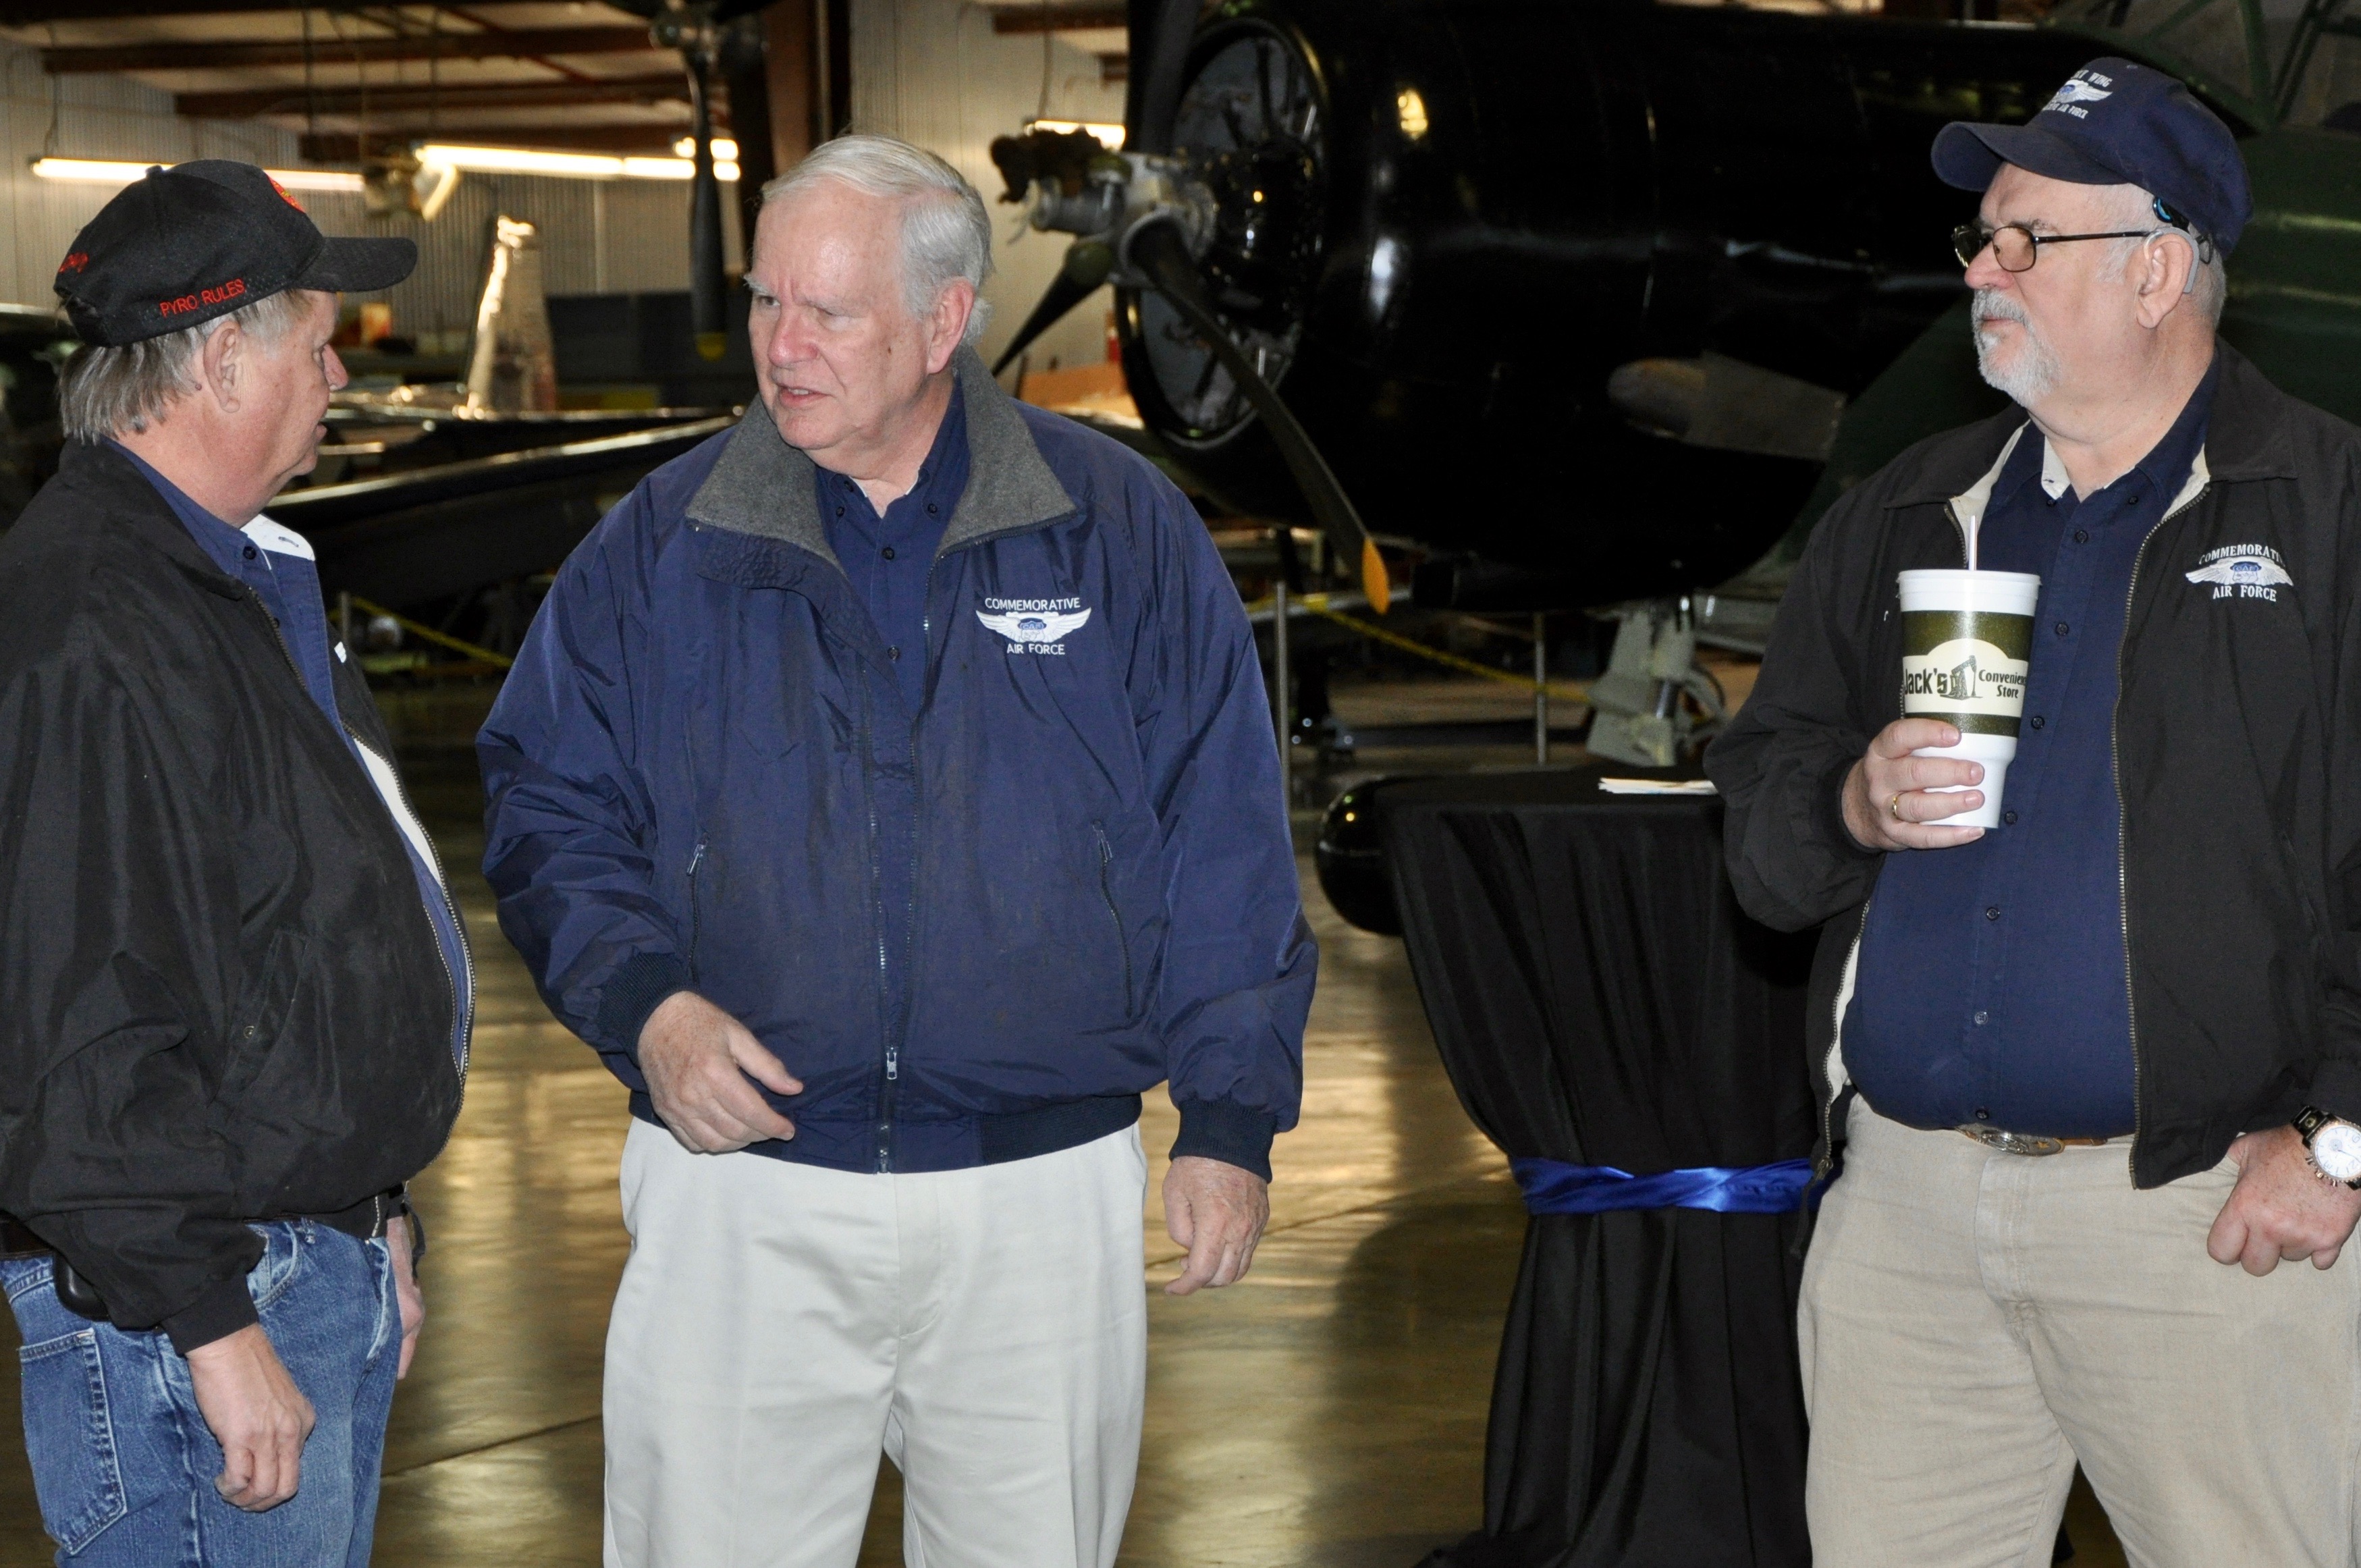 HSW members David Linebarger of the Blastards, Bill Coombes the wing PIO and Paul Cooper socialize during the event.